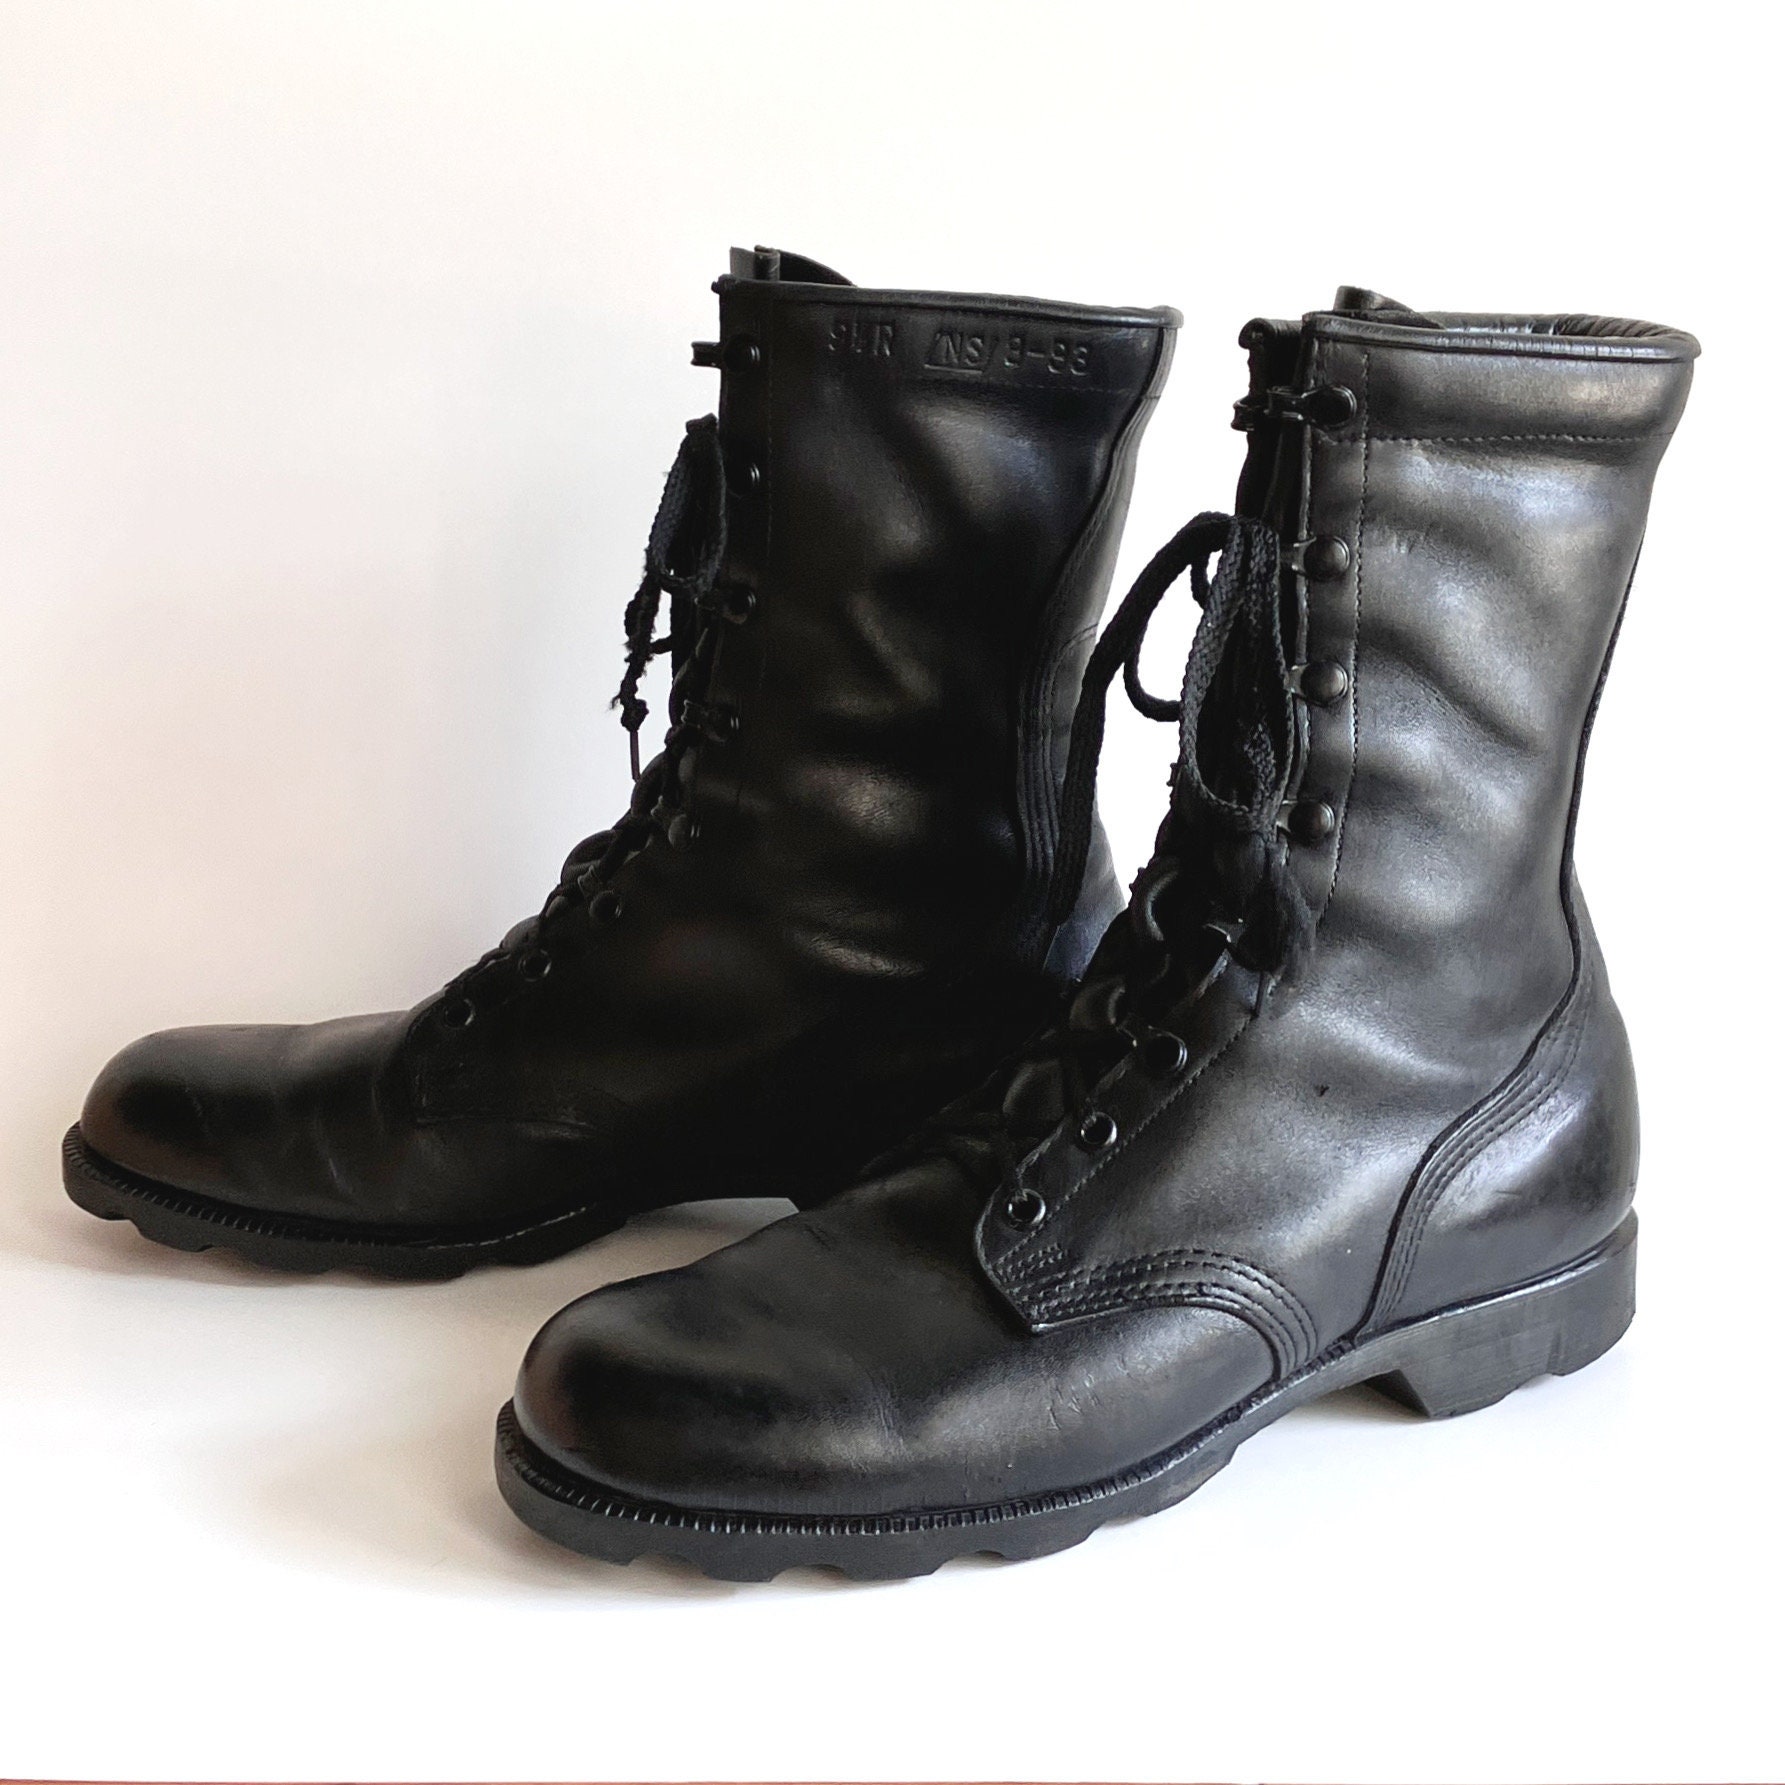 Vintage 90s Black Leather Army Combat Boots Calf High Lace up Classic ...